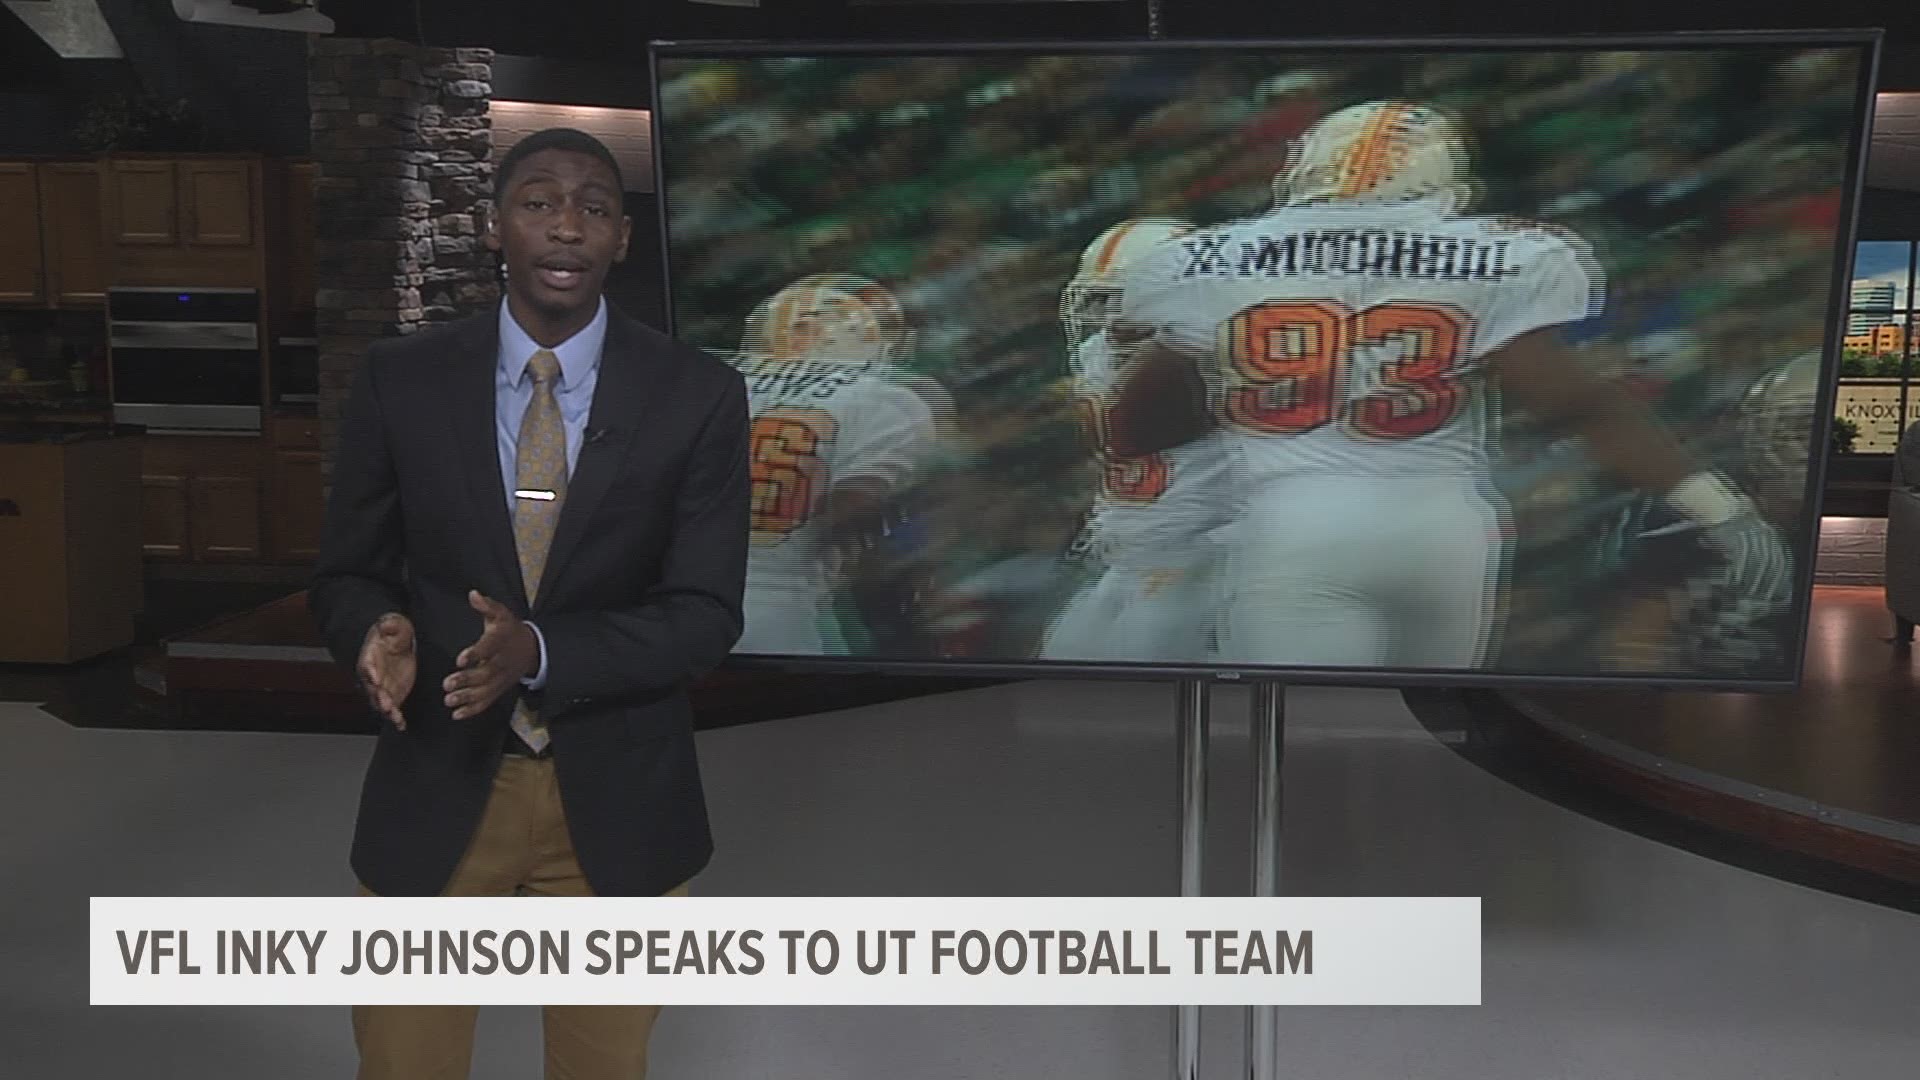 VFL Inky Johnson has an inspirational story. On Friday, he shared that story with the 2019 Tennessee football team and gave them words of encouragement.